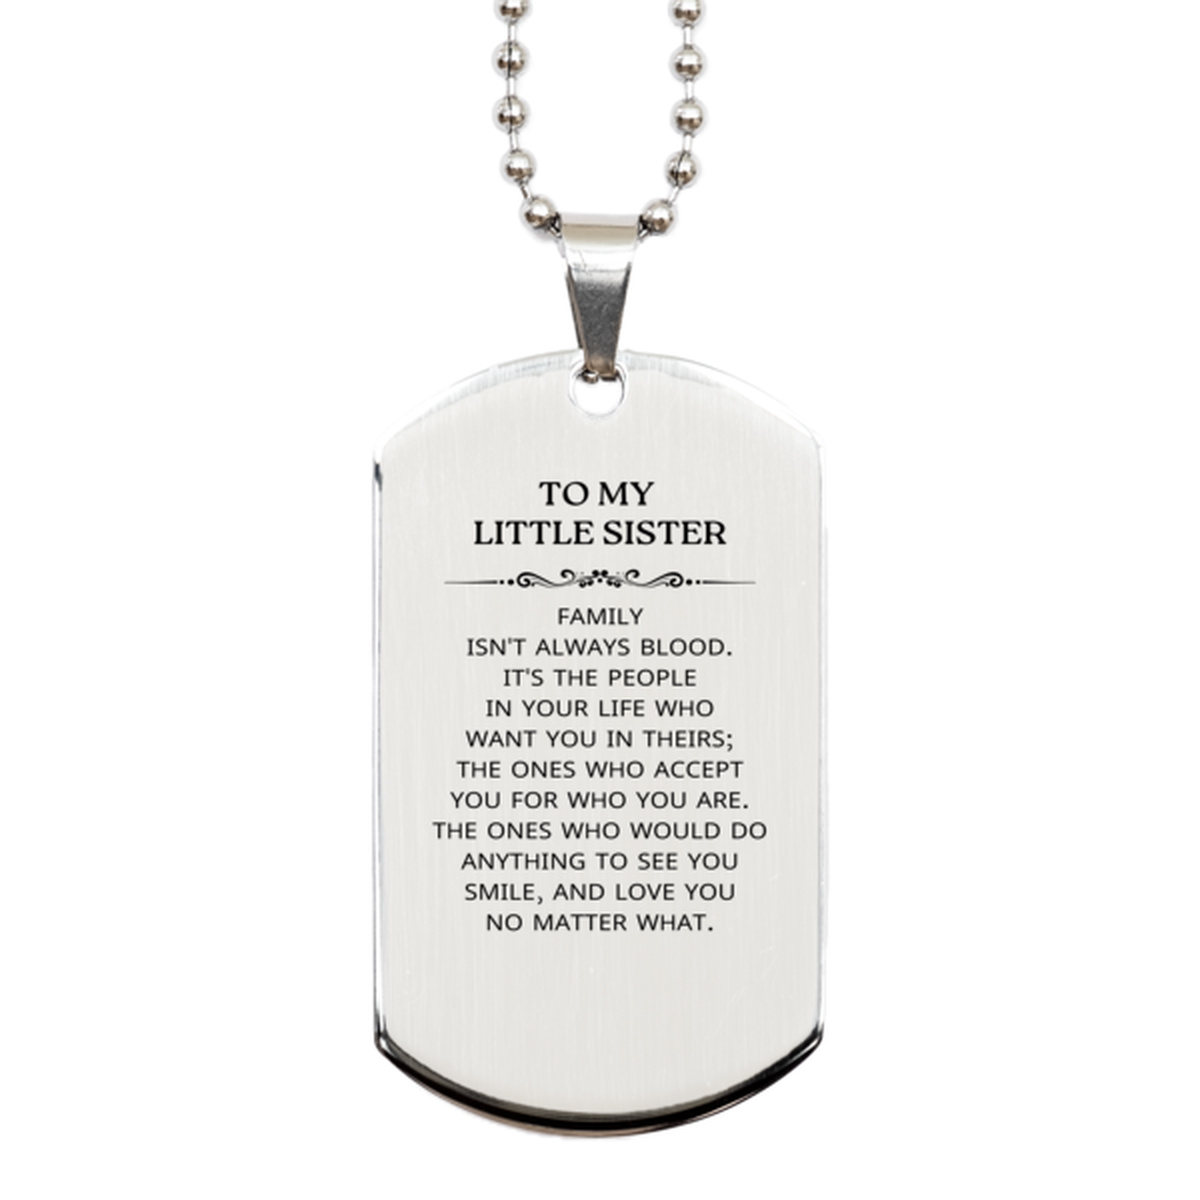 To My Little Sister Gifts, Family isn't always blood, Little Sister Silver Dog Tag, Birthday Christmas Unique Present For Little Sister